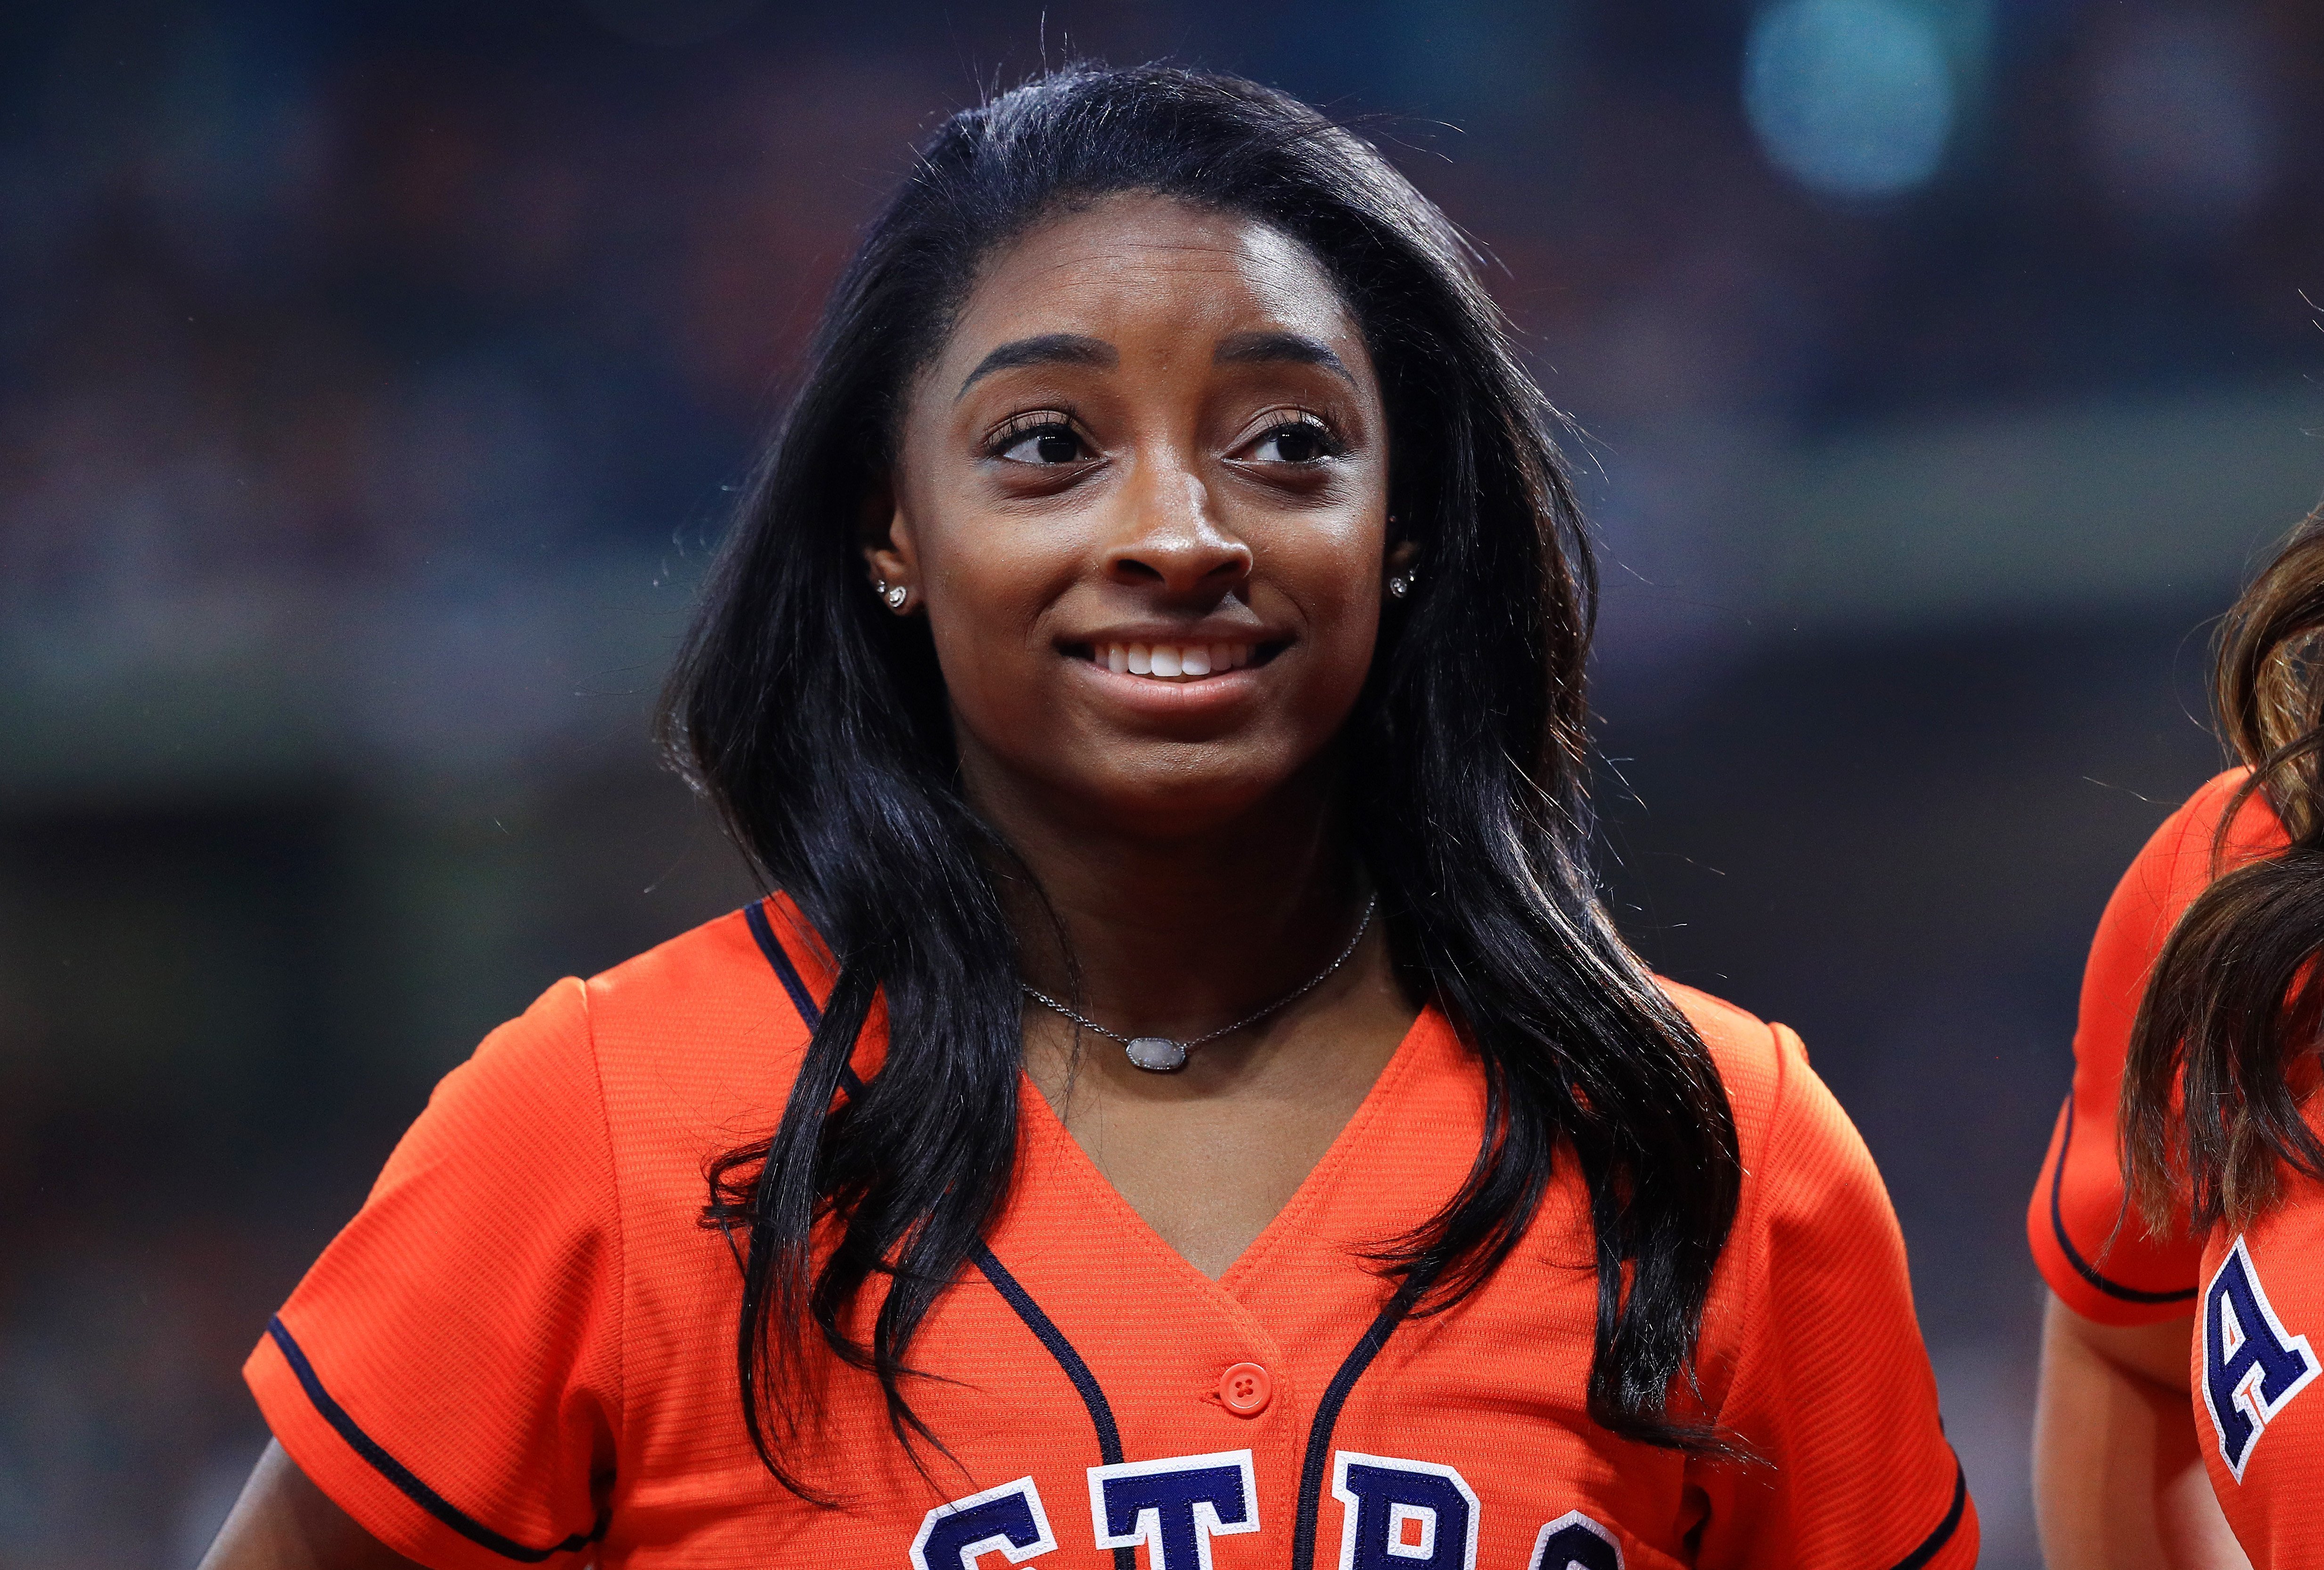 Simone Biles at a World Series game between the Houston Astros and the Washington Nationals on Oct. 23, 2019 in Texas | Photo: Getty Images